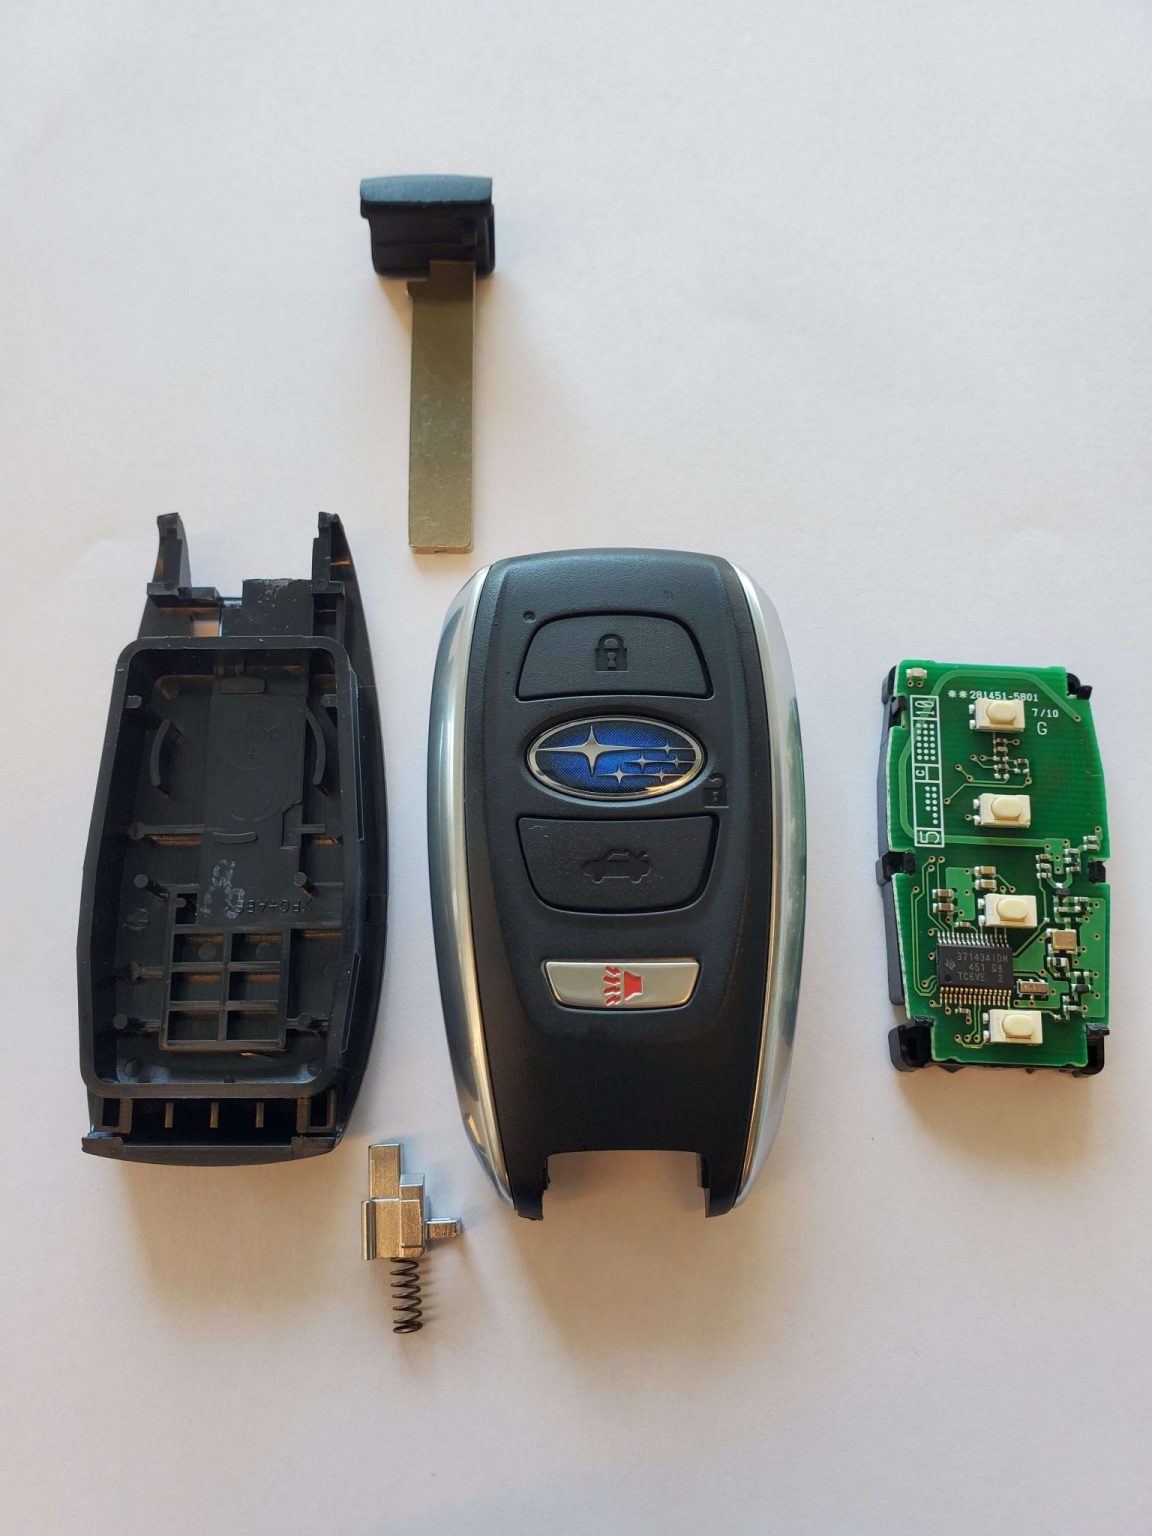 Lost Subaru Key Replacement What To Do, Options, Costs, Tips & More